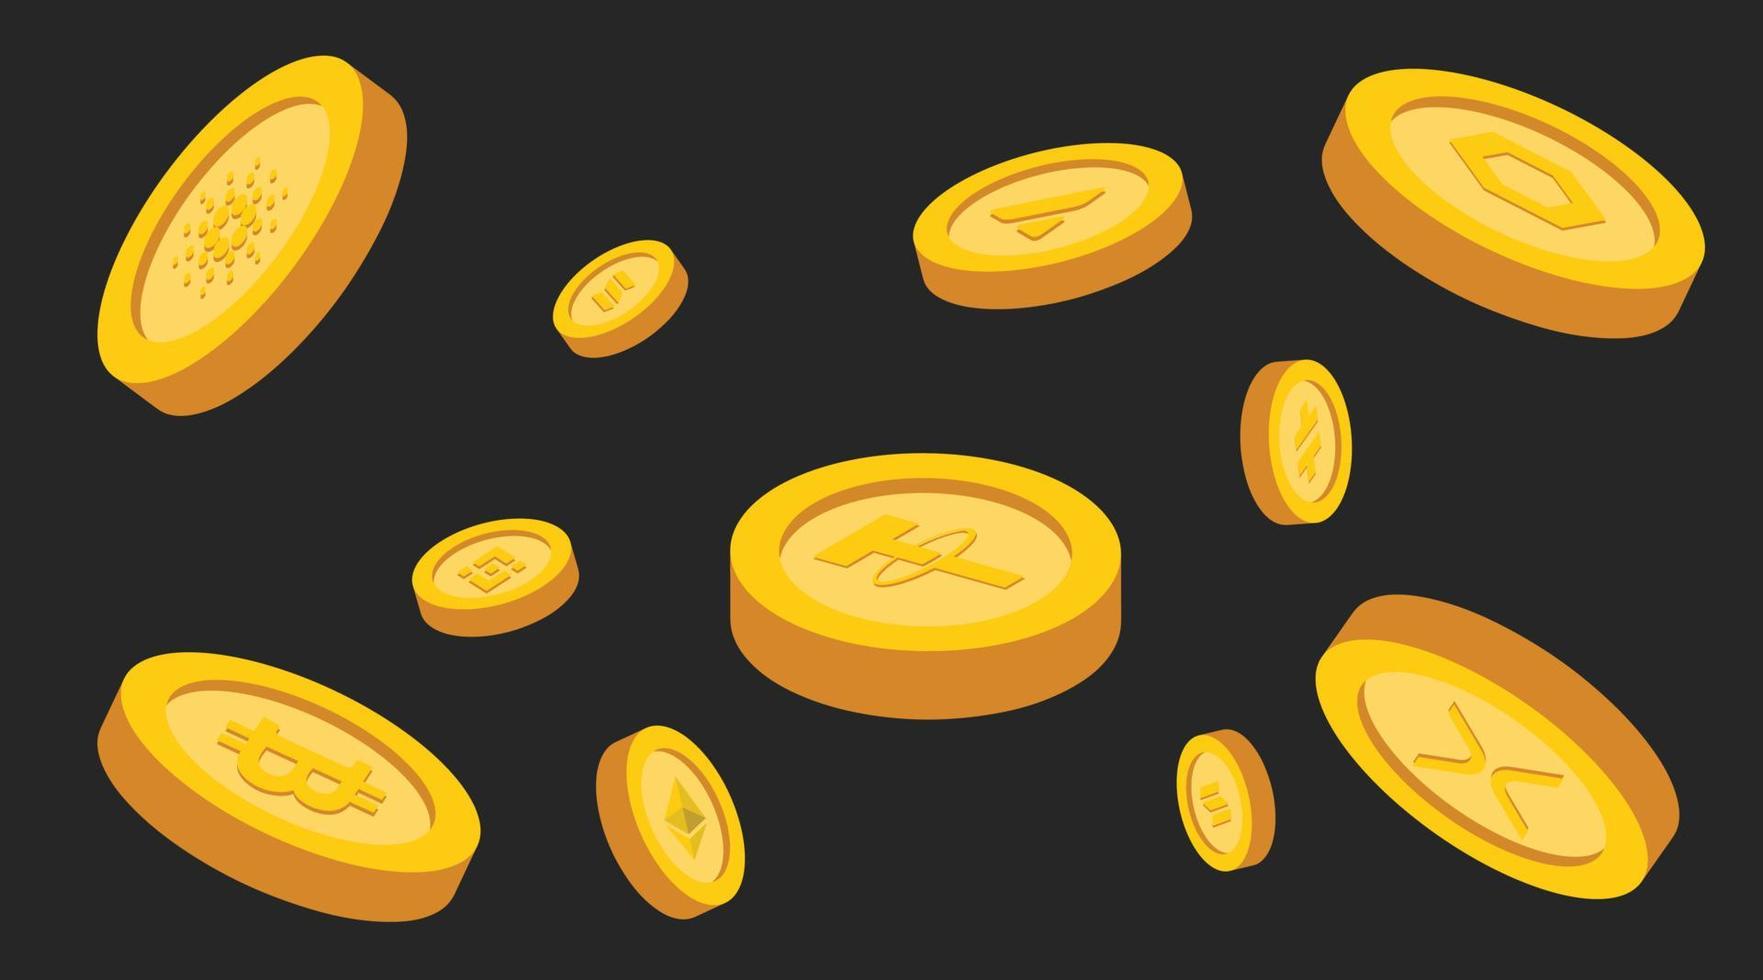 Crypto currency golden coins floating free vector illustration template